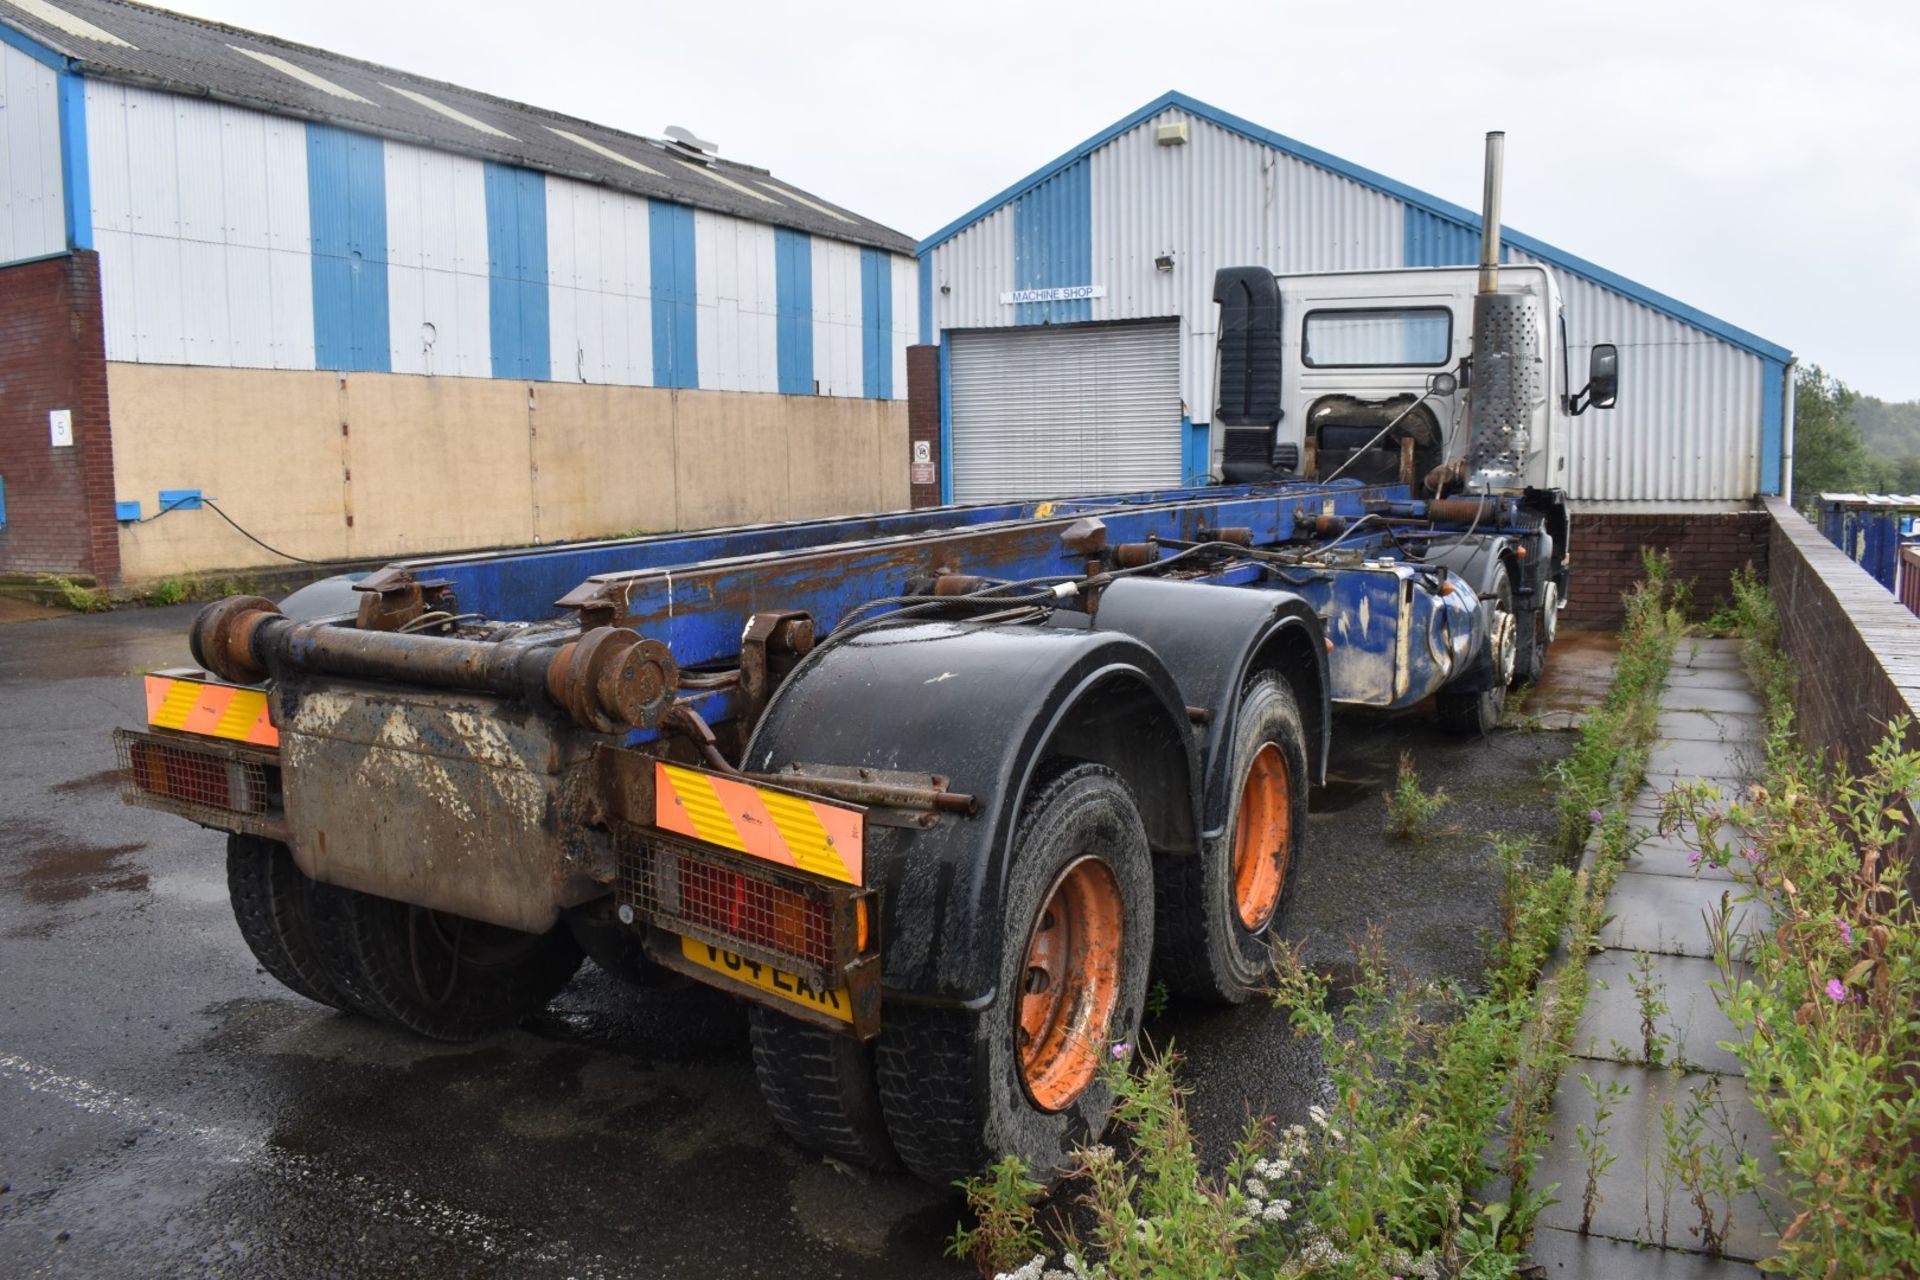 1 x Volvo 340 Plant Lorry With Tipper Chasis and Fitted Winch - CL547 - Location: South Yorkshire. - Image 12 of 25